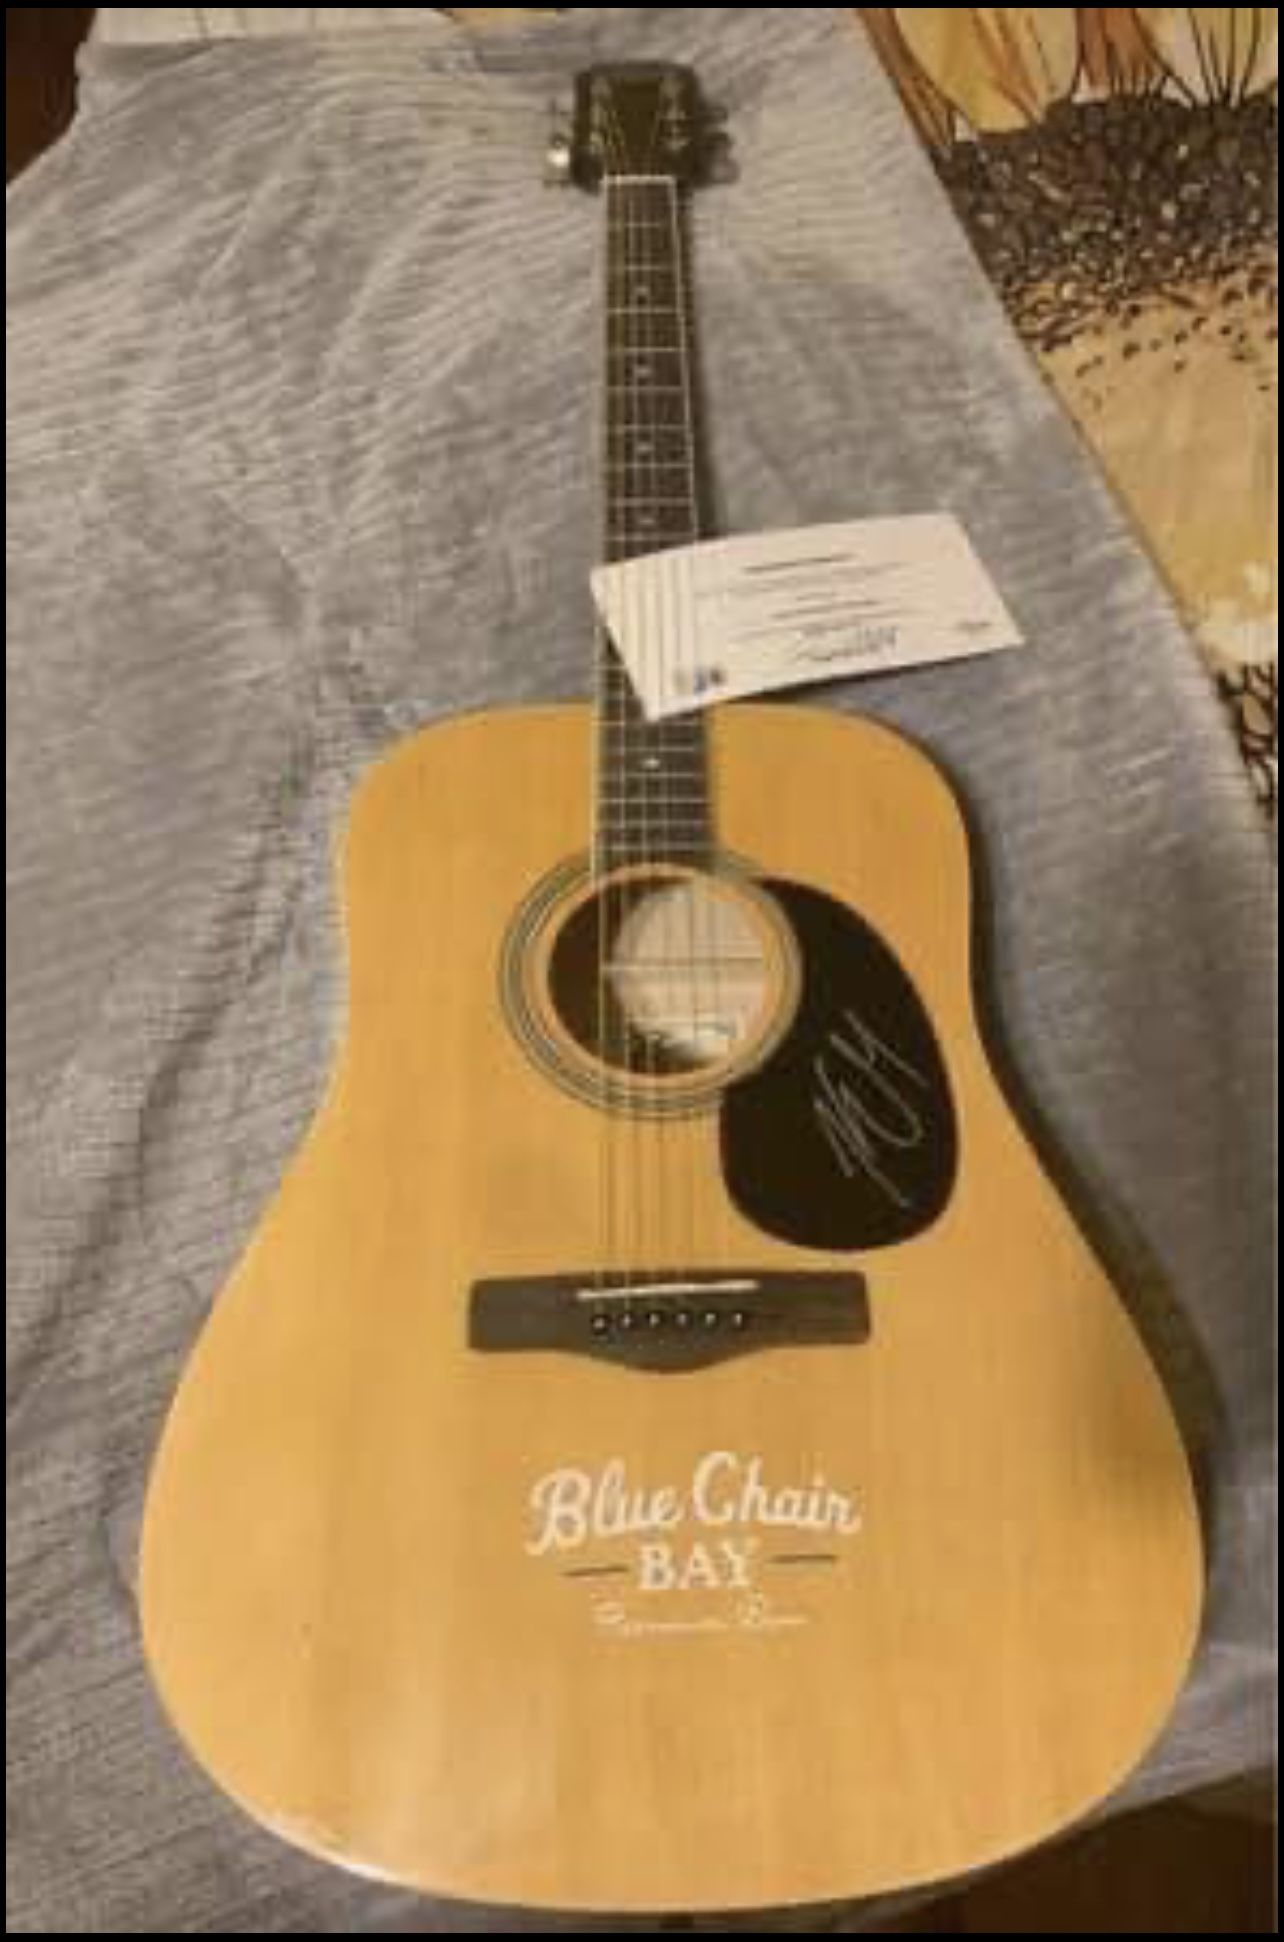 BLUE CHAIR BAY, KENNY CHESNEY AUTOGRQPHED ROGUE ACOUSTIC GUITAR WITH COA